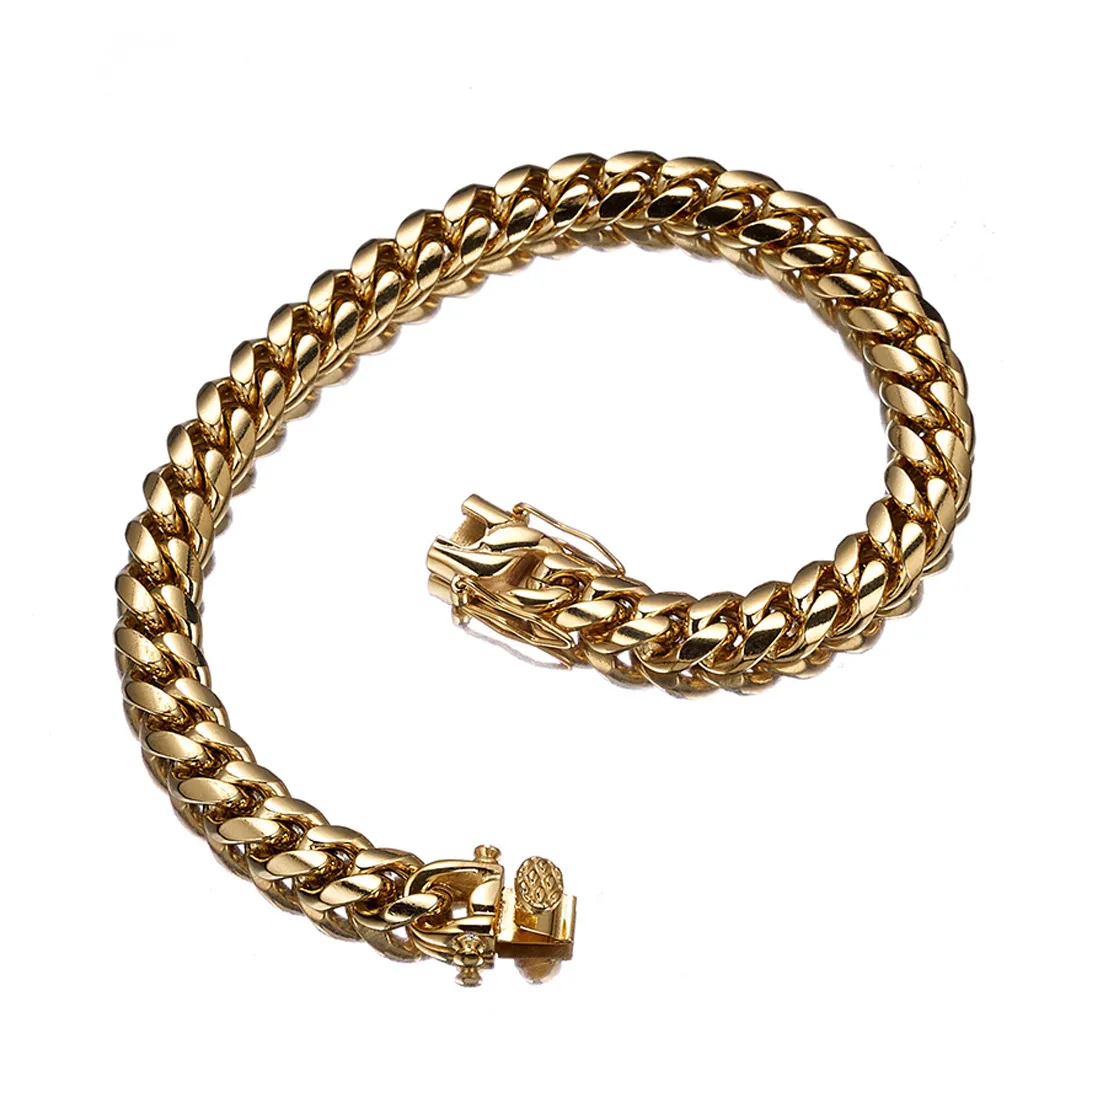 Mens Hip Hop Cuban Link Chain Bracelets Stainless Steel 18K Real Gold Plated Bangle Jewelry Gift 818mm9963905